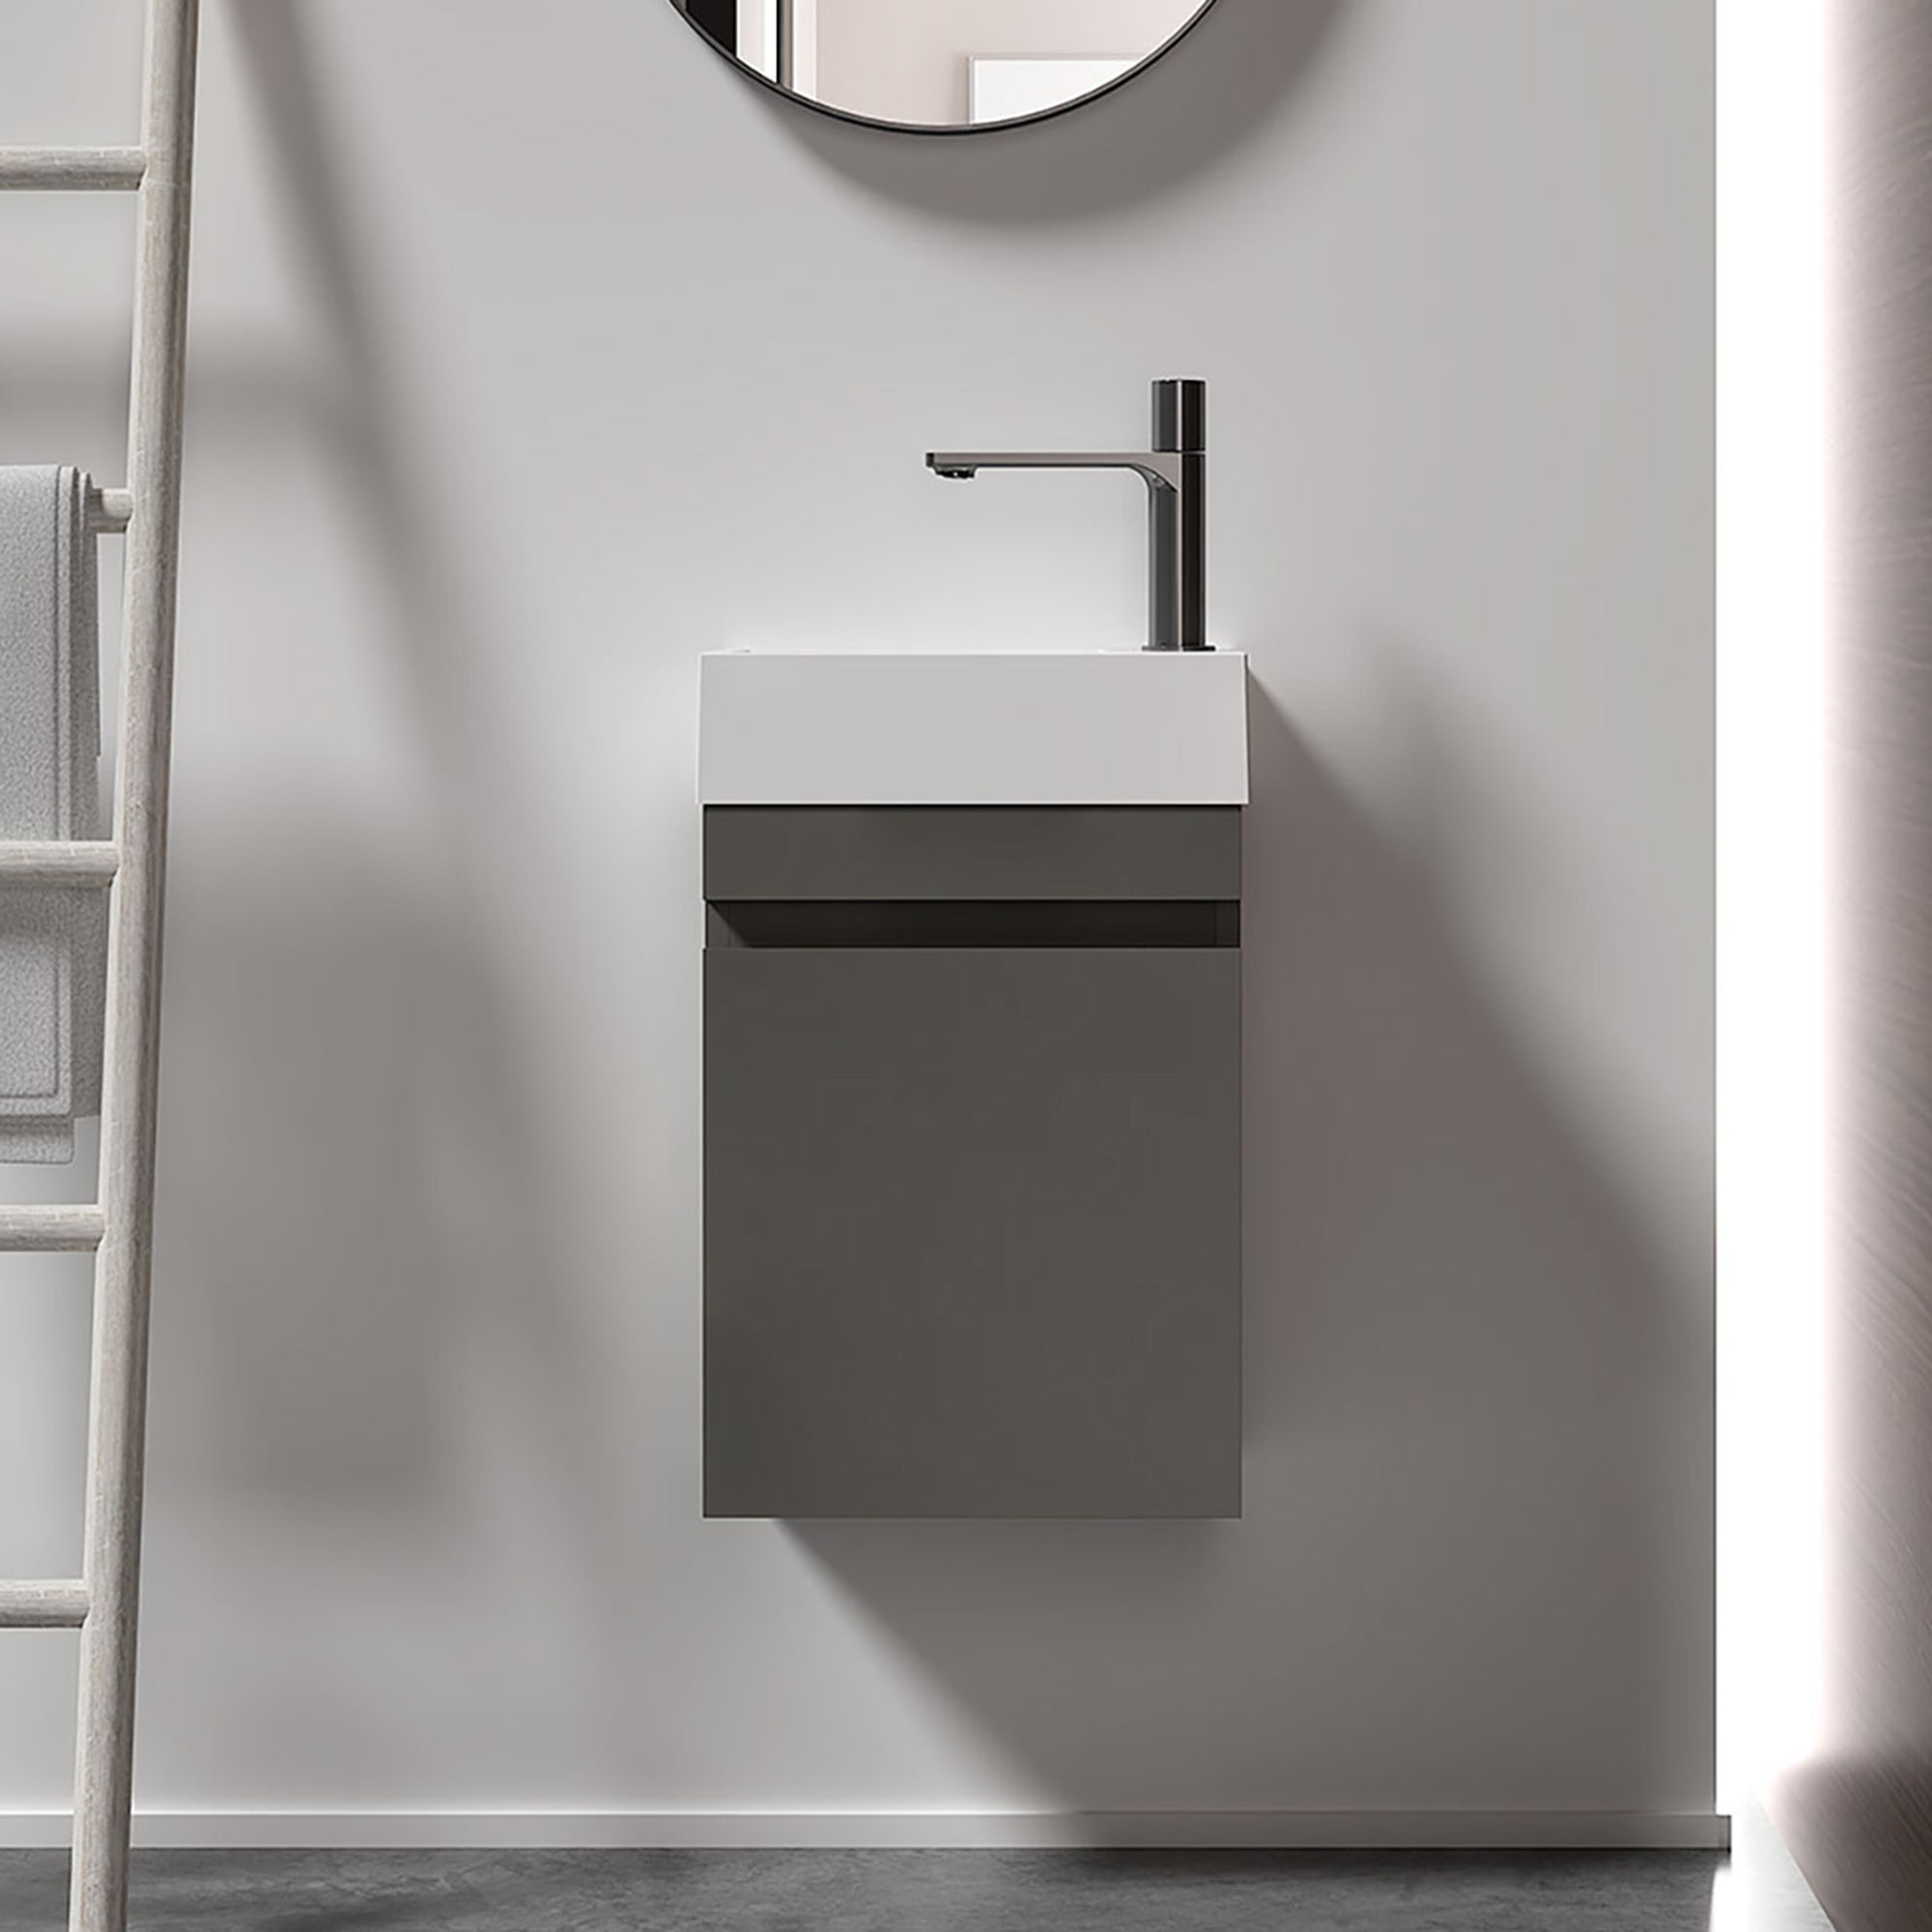 Wall-Mounted Bathroom Vanity Set in Grey with White Integrated Artificial Stone Sink